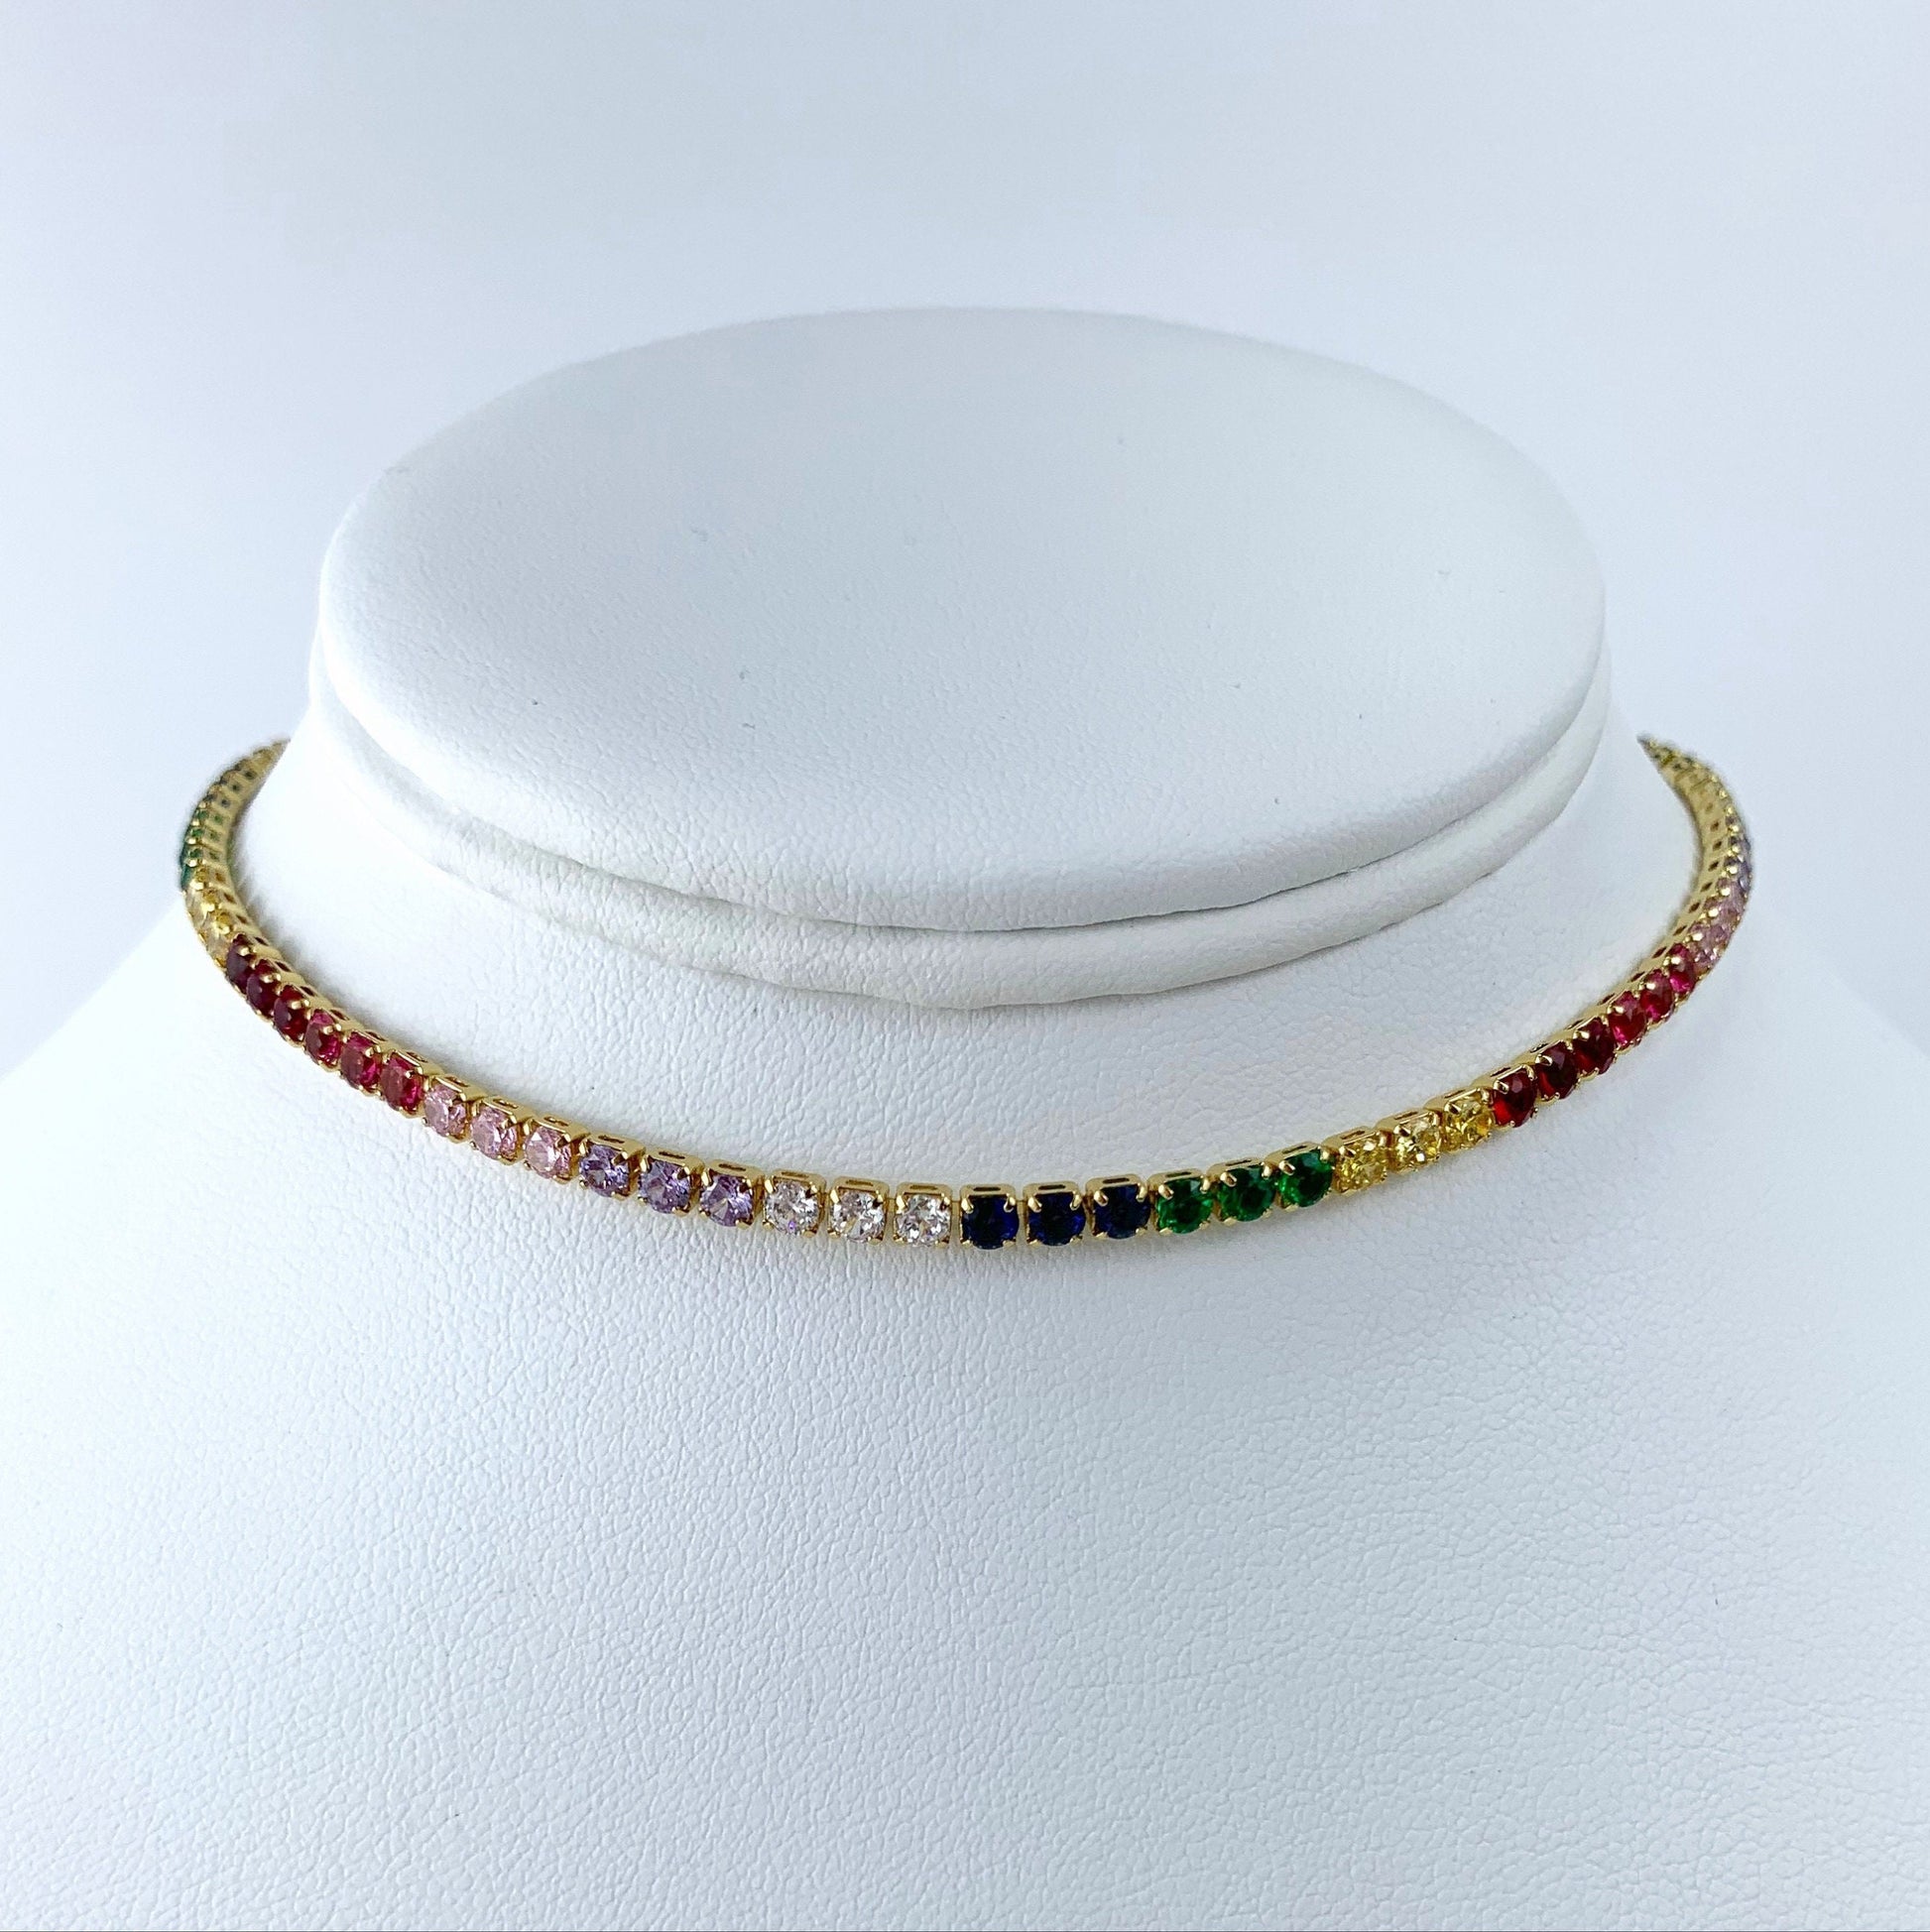 18k Gold Filled Fancy Rainbow Choker Featuring High Quality Colorful Cubic Zirconia For Wholesale and Jewelry Supplies